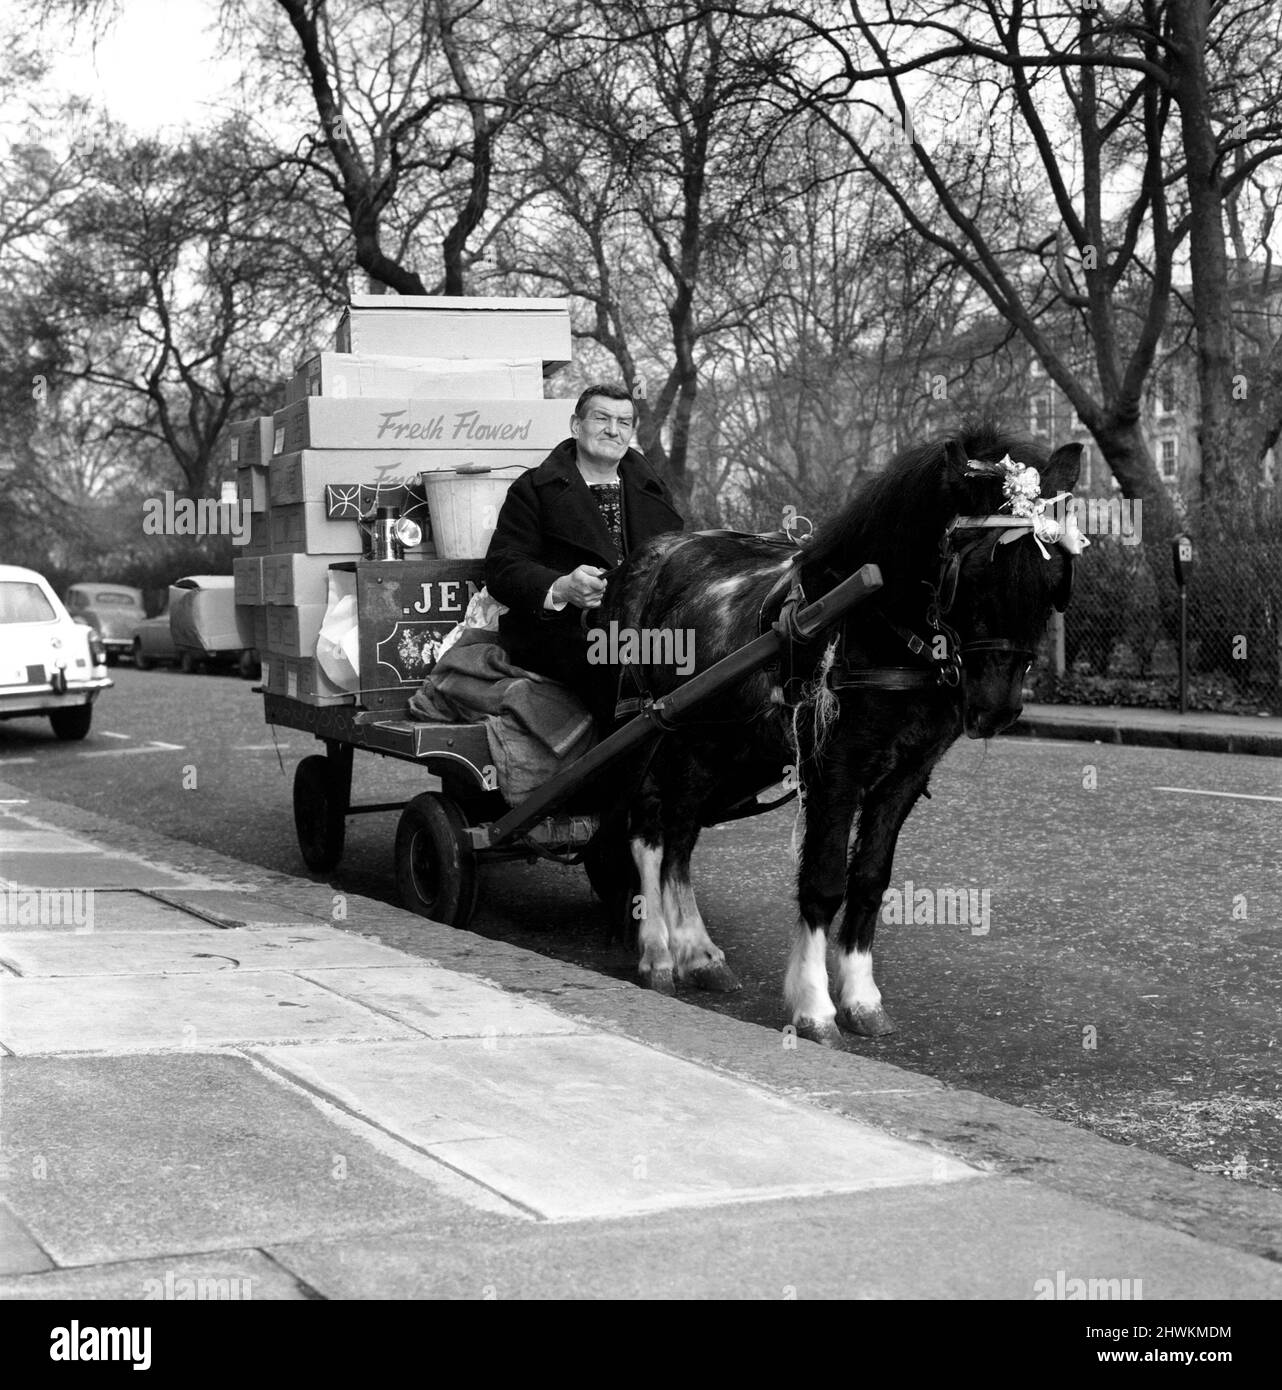 William Packman and Pony 'Twinkletoes'. William Packman, street flower trader of Tooting, out with 3-year-old Shetland pony 'Twinkletoes', in the Pimlico area. December 1972 72-11761 Stock Photo